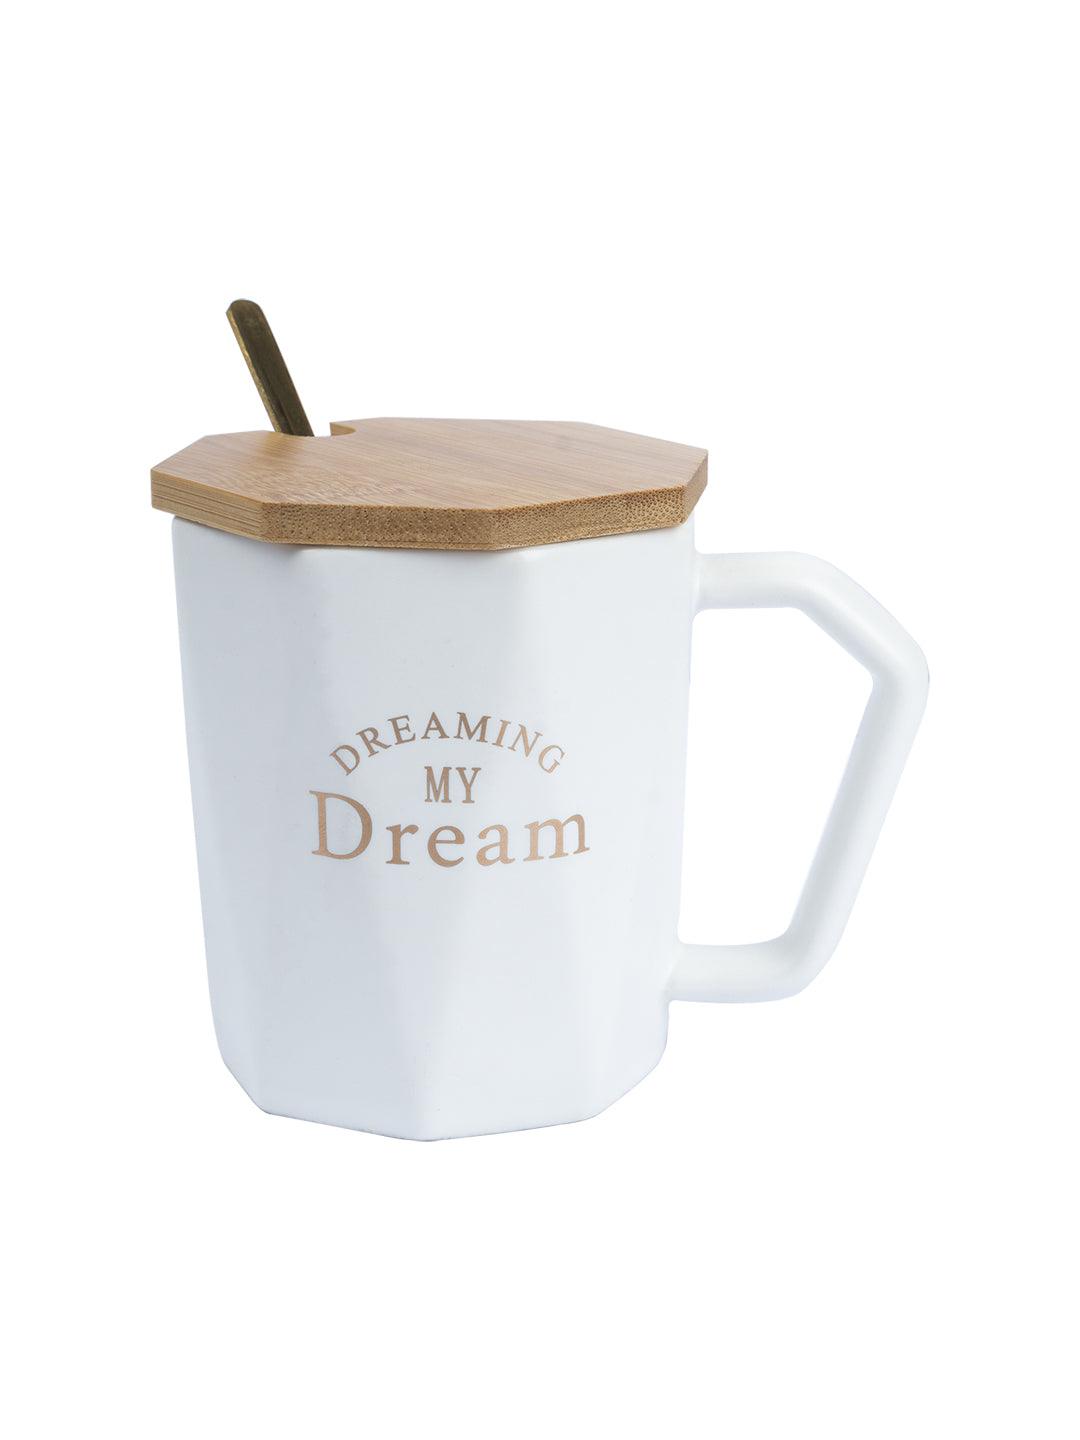 'DREAMING MY Dream' Ceramic Coffee Mug With Wooden Lid - White, 320 Ml - MARKET 99